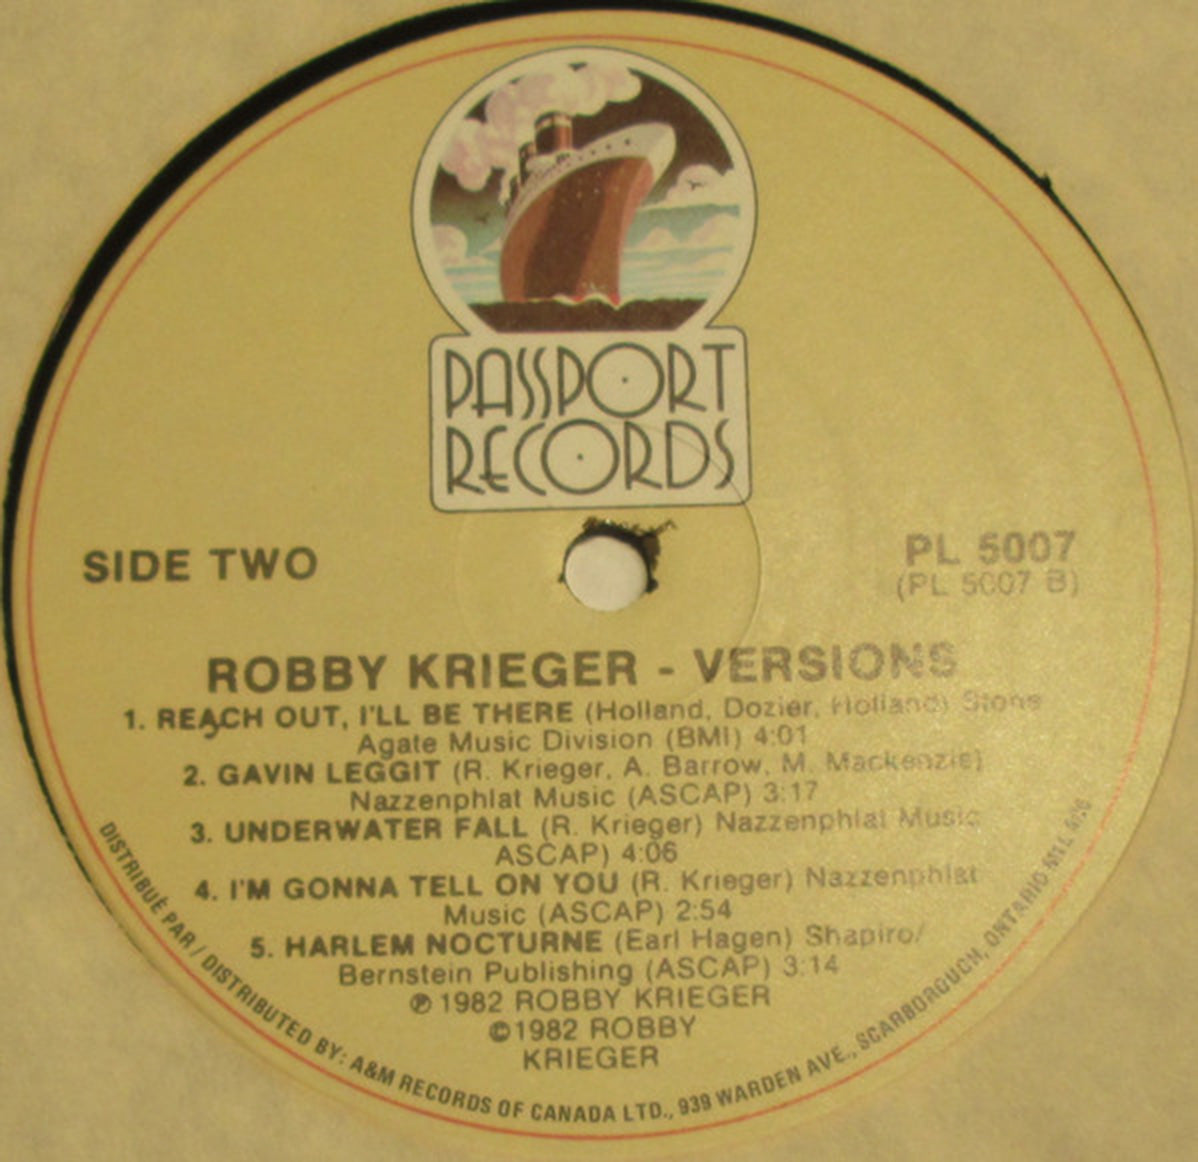 Robby Krieger – Versions